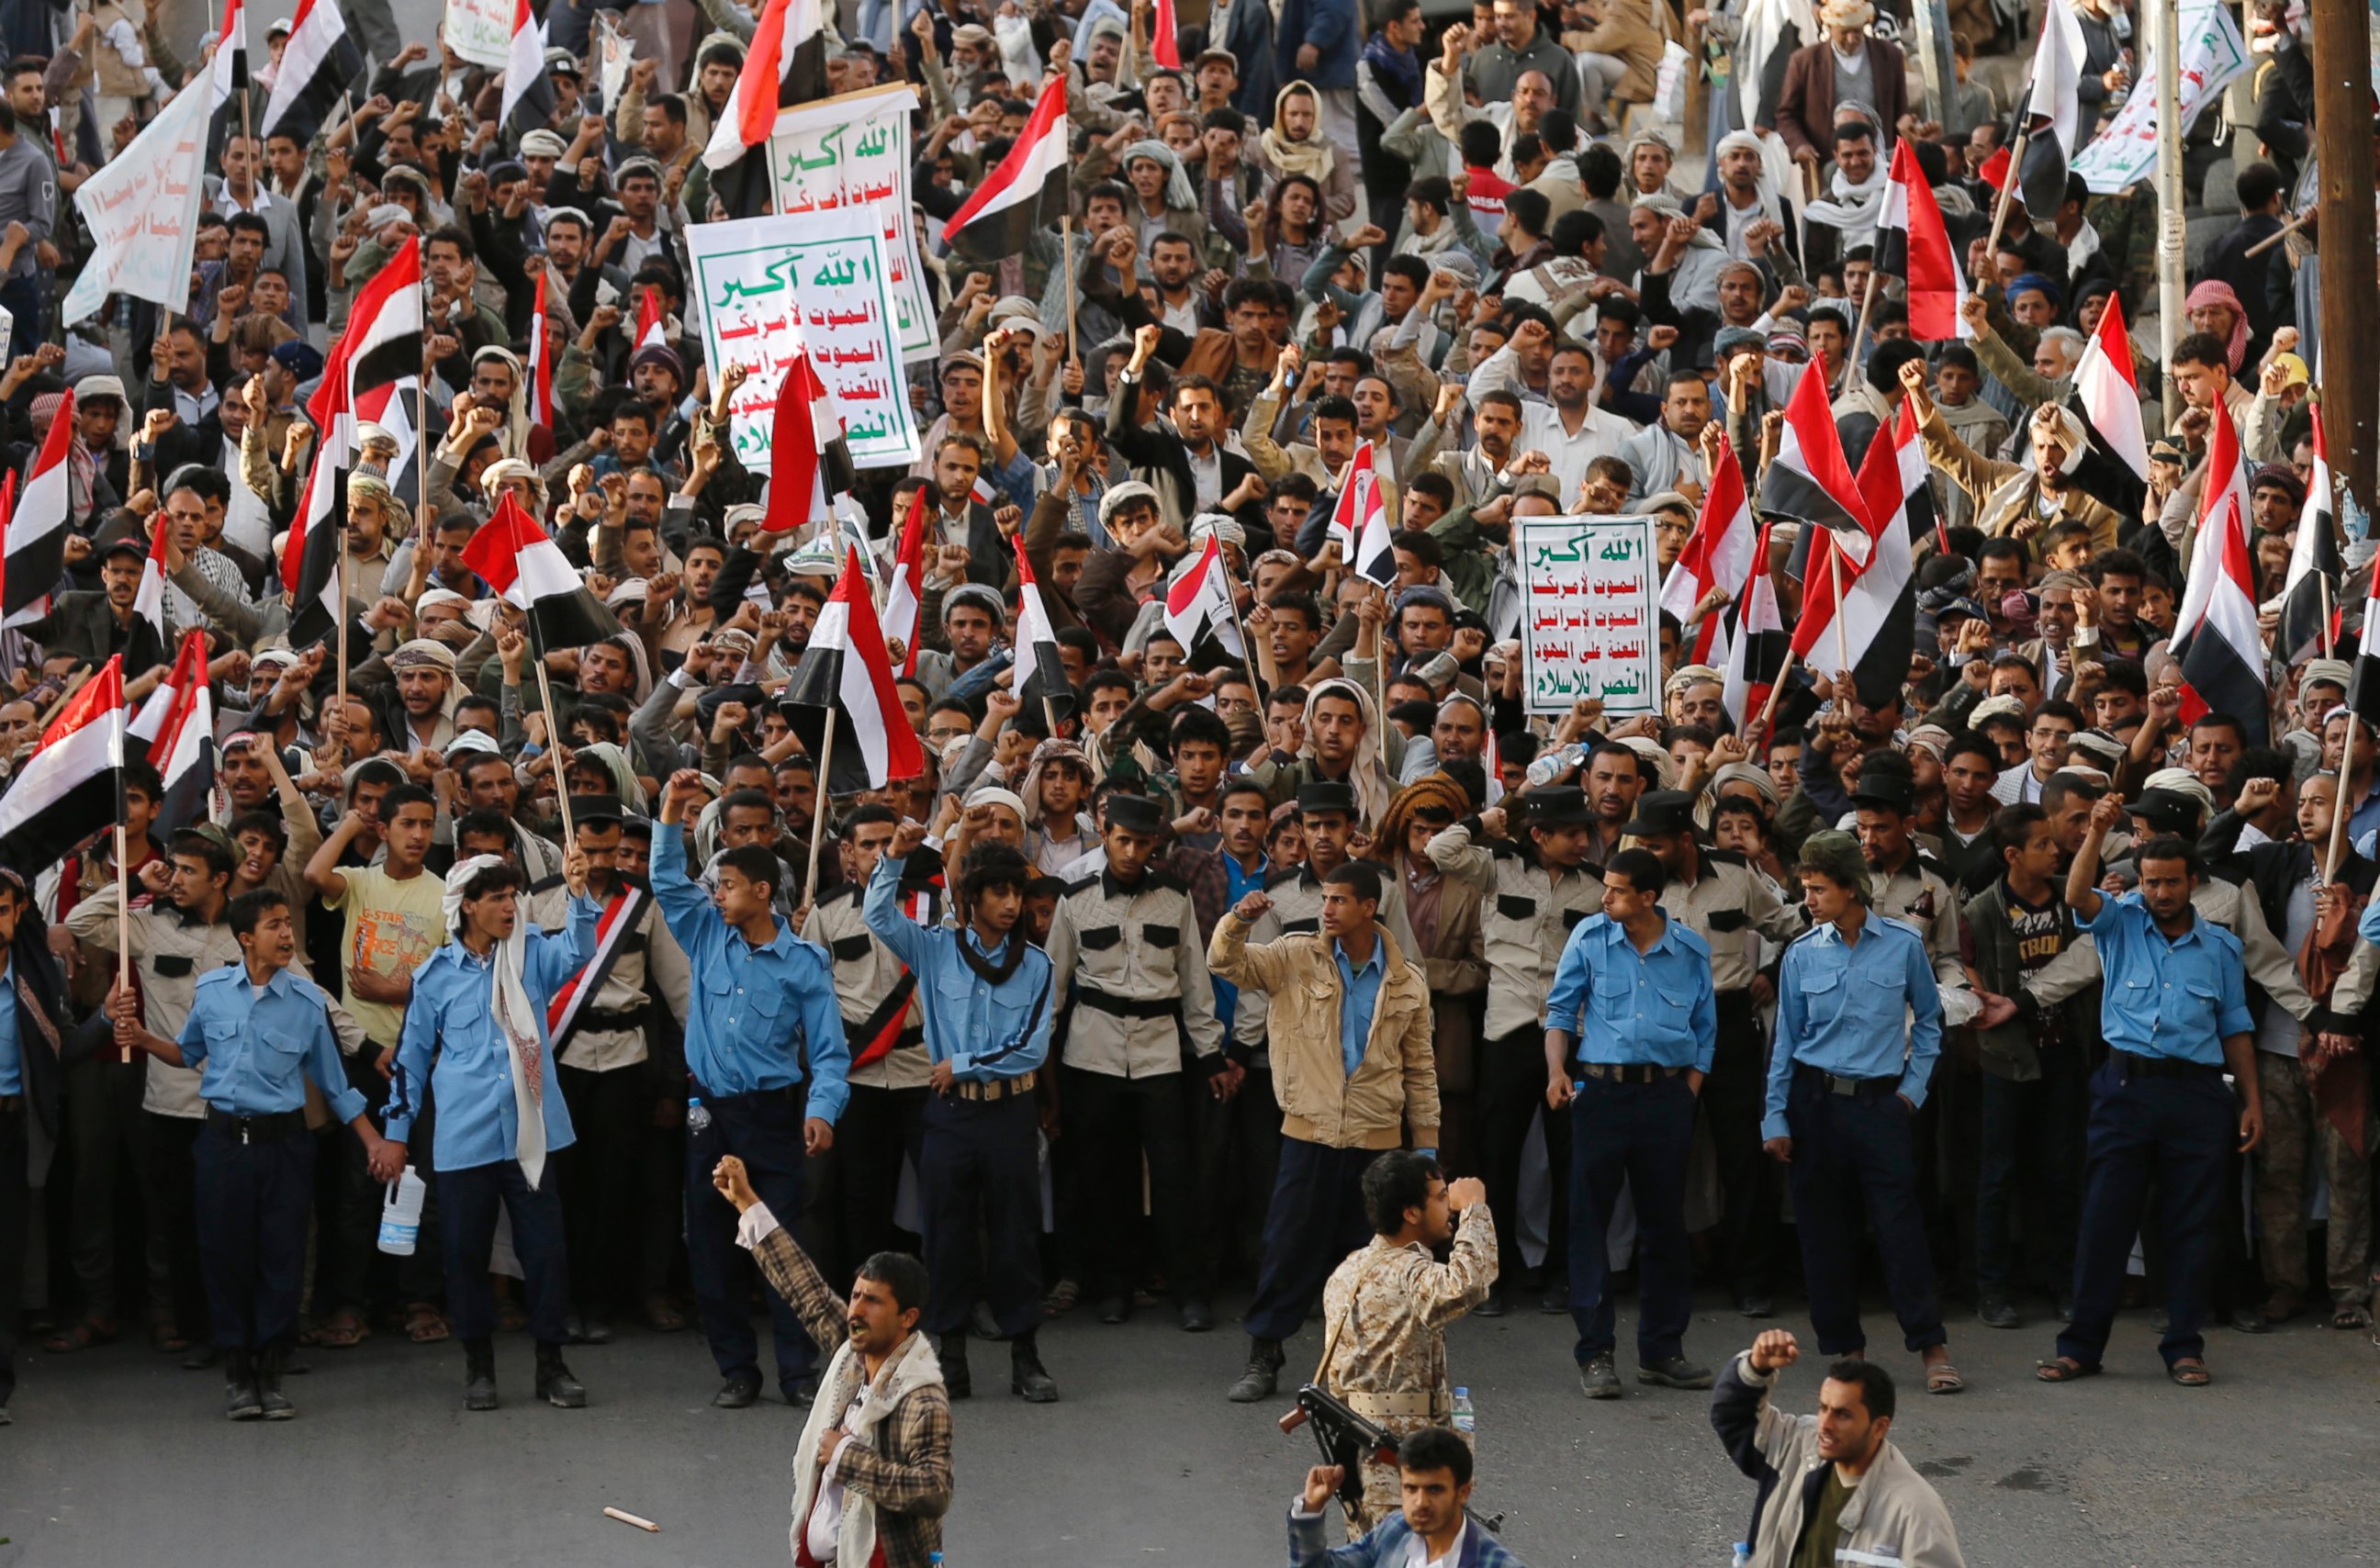 PHOTO: Pro-Houthi protesters demonstrate to commemorate the fourth anniversary of the uprising that toppled former President Ali Abdullah Saleh in Sanaa, Feb. 11, 2015. The banners praised Allah and expressed anti-Western sentiments.